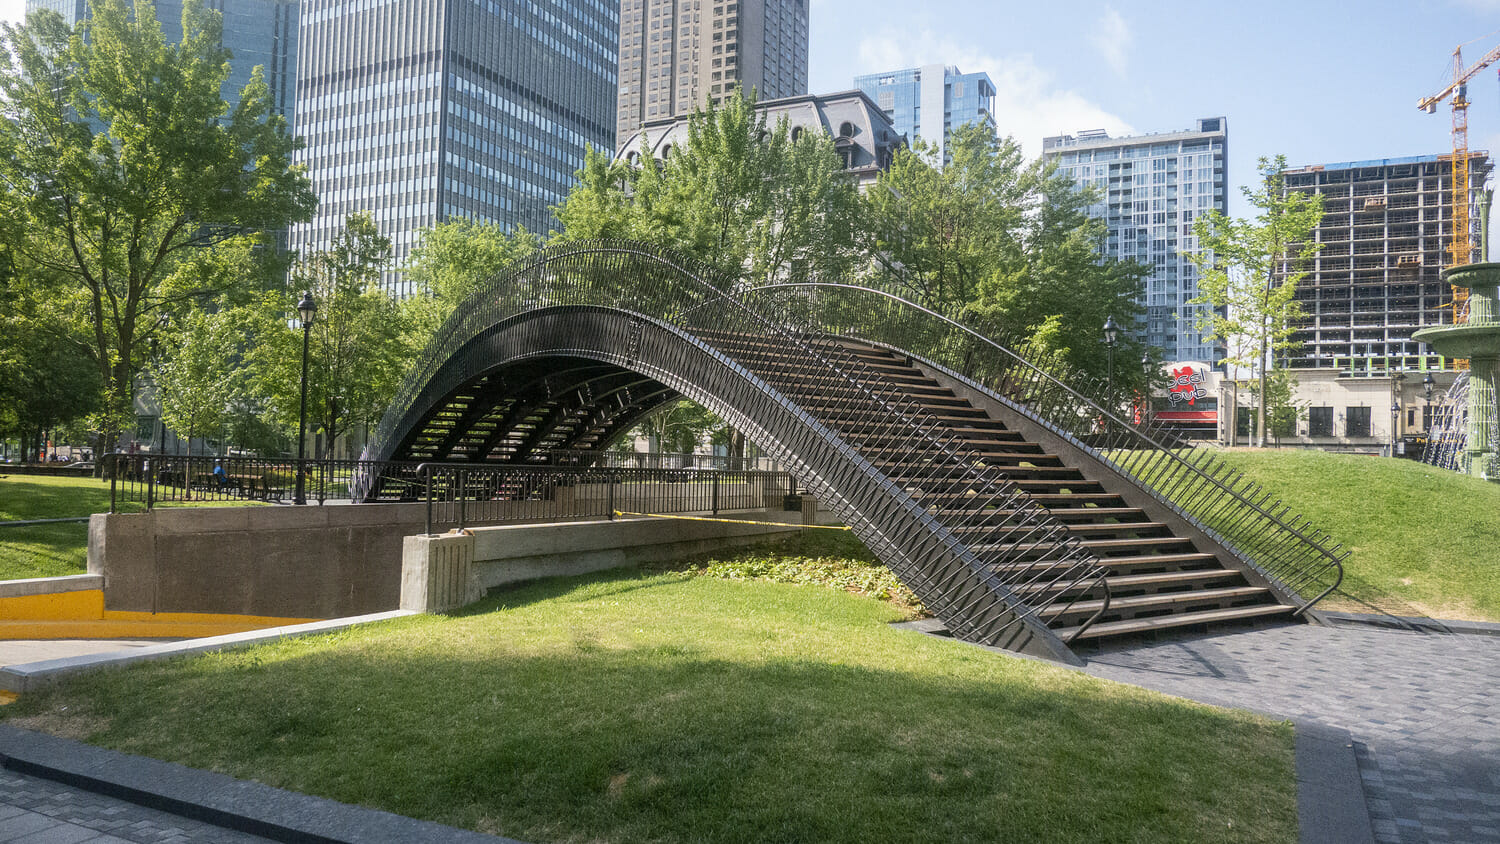 A bridge in the middle of a park with tall buildings in the background.